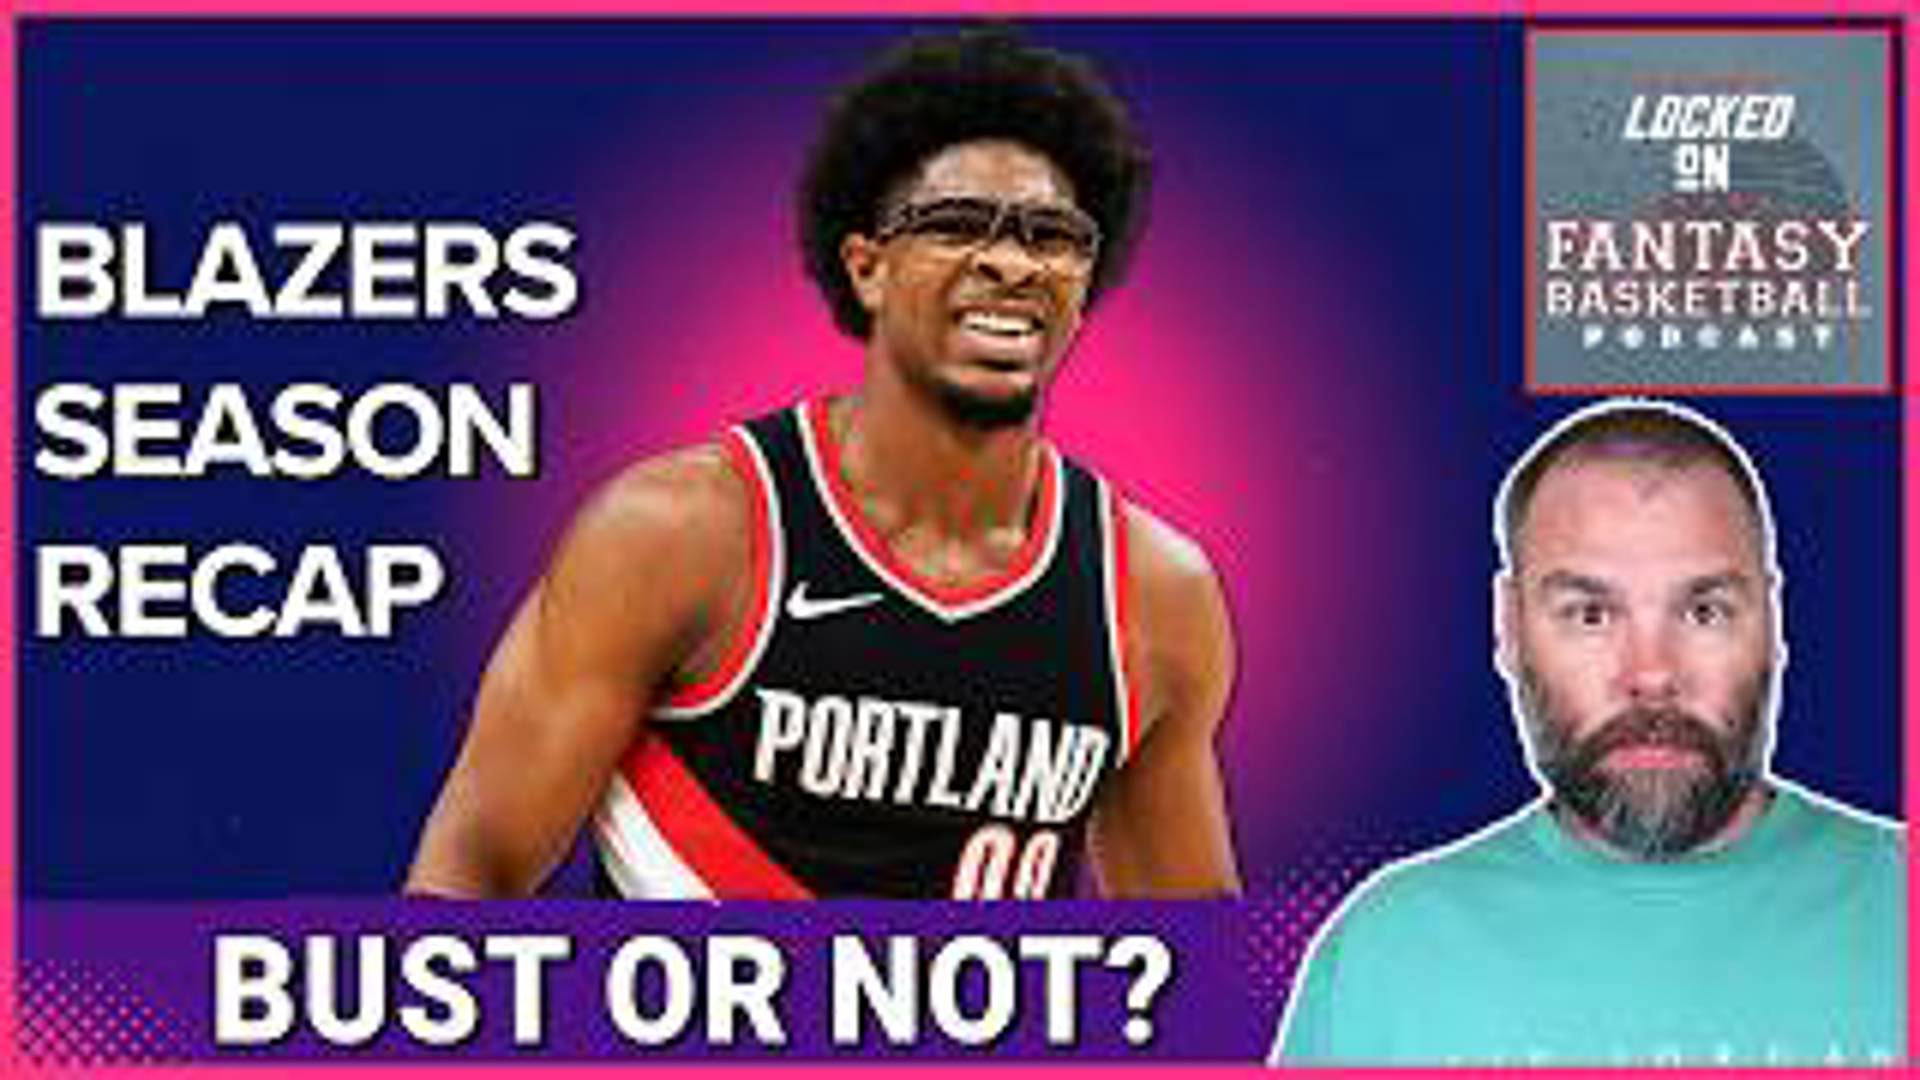 This season's Portland Trail Blazers have had their fair share of ups and downs. Join Josh Lloyd as we dissect key performances, including Scoot Henderson's debut.